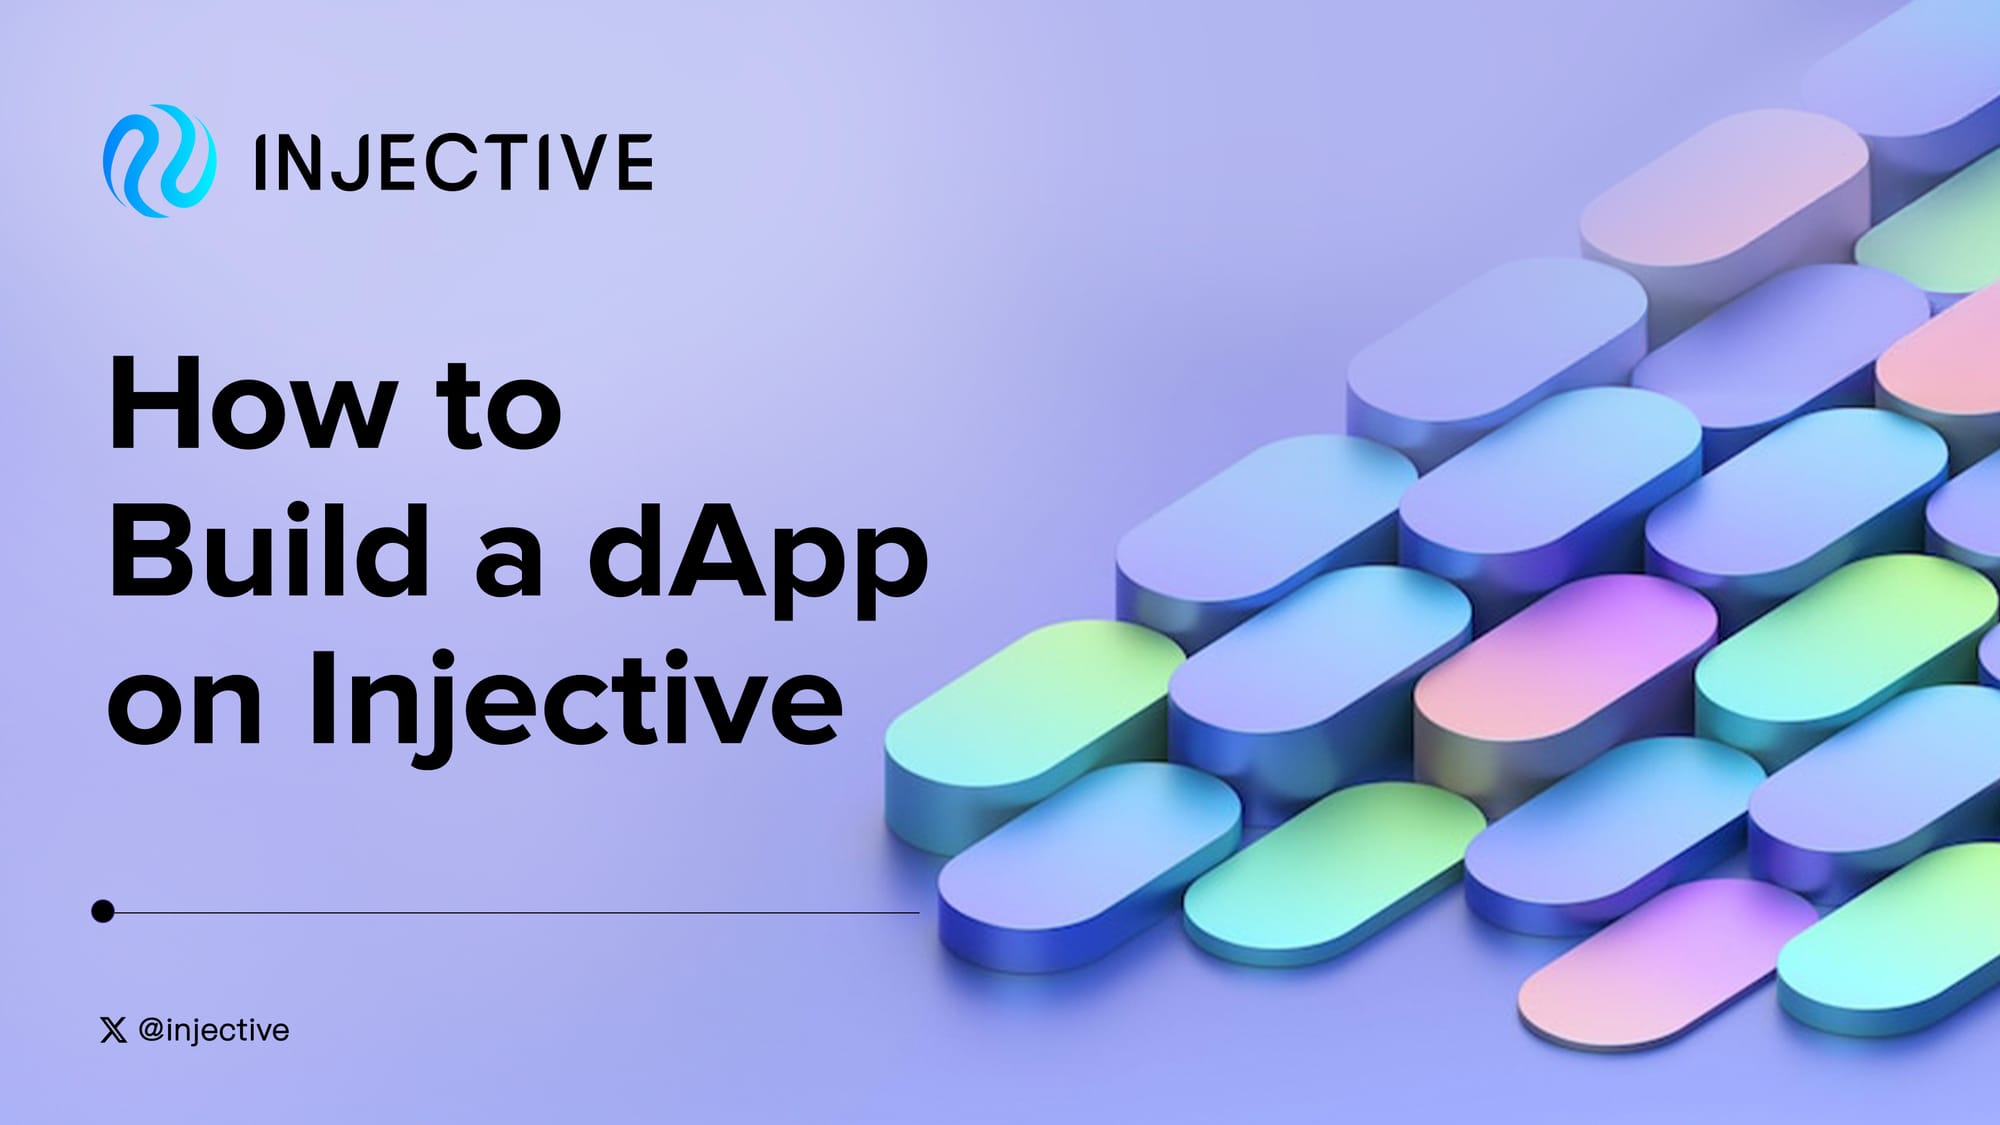 Launch a dApp on Injective